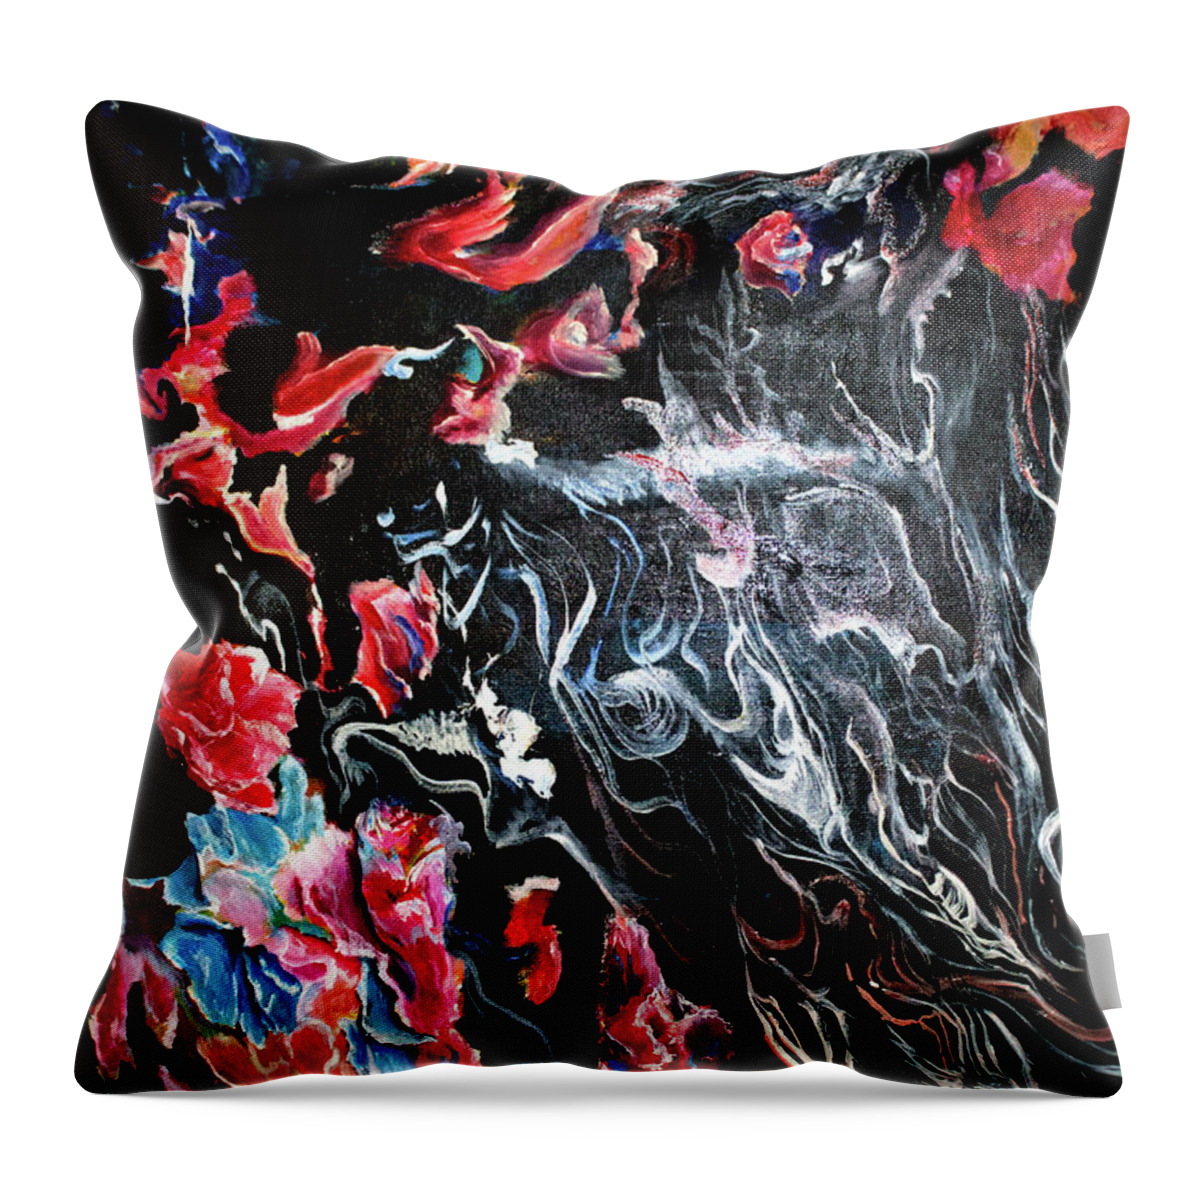 Spring Throw Pillow featuring the painting Rose Melt by Medea Ioseliani